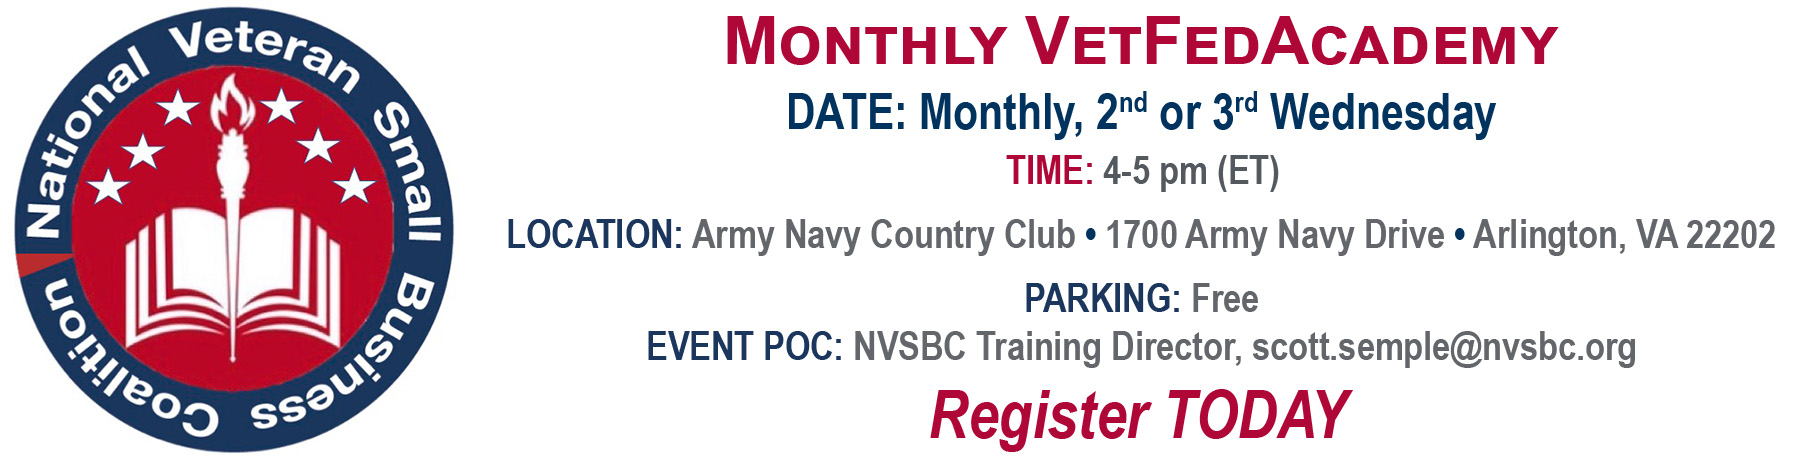 VETFedAcademy Monthly Event